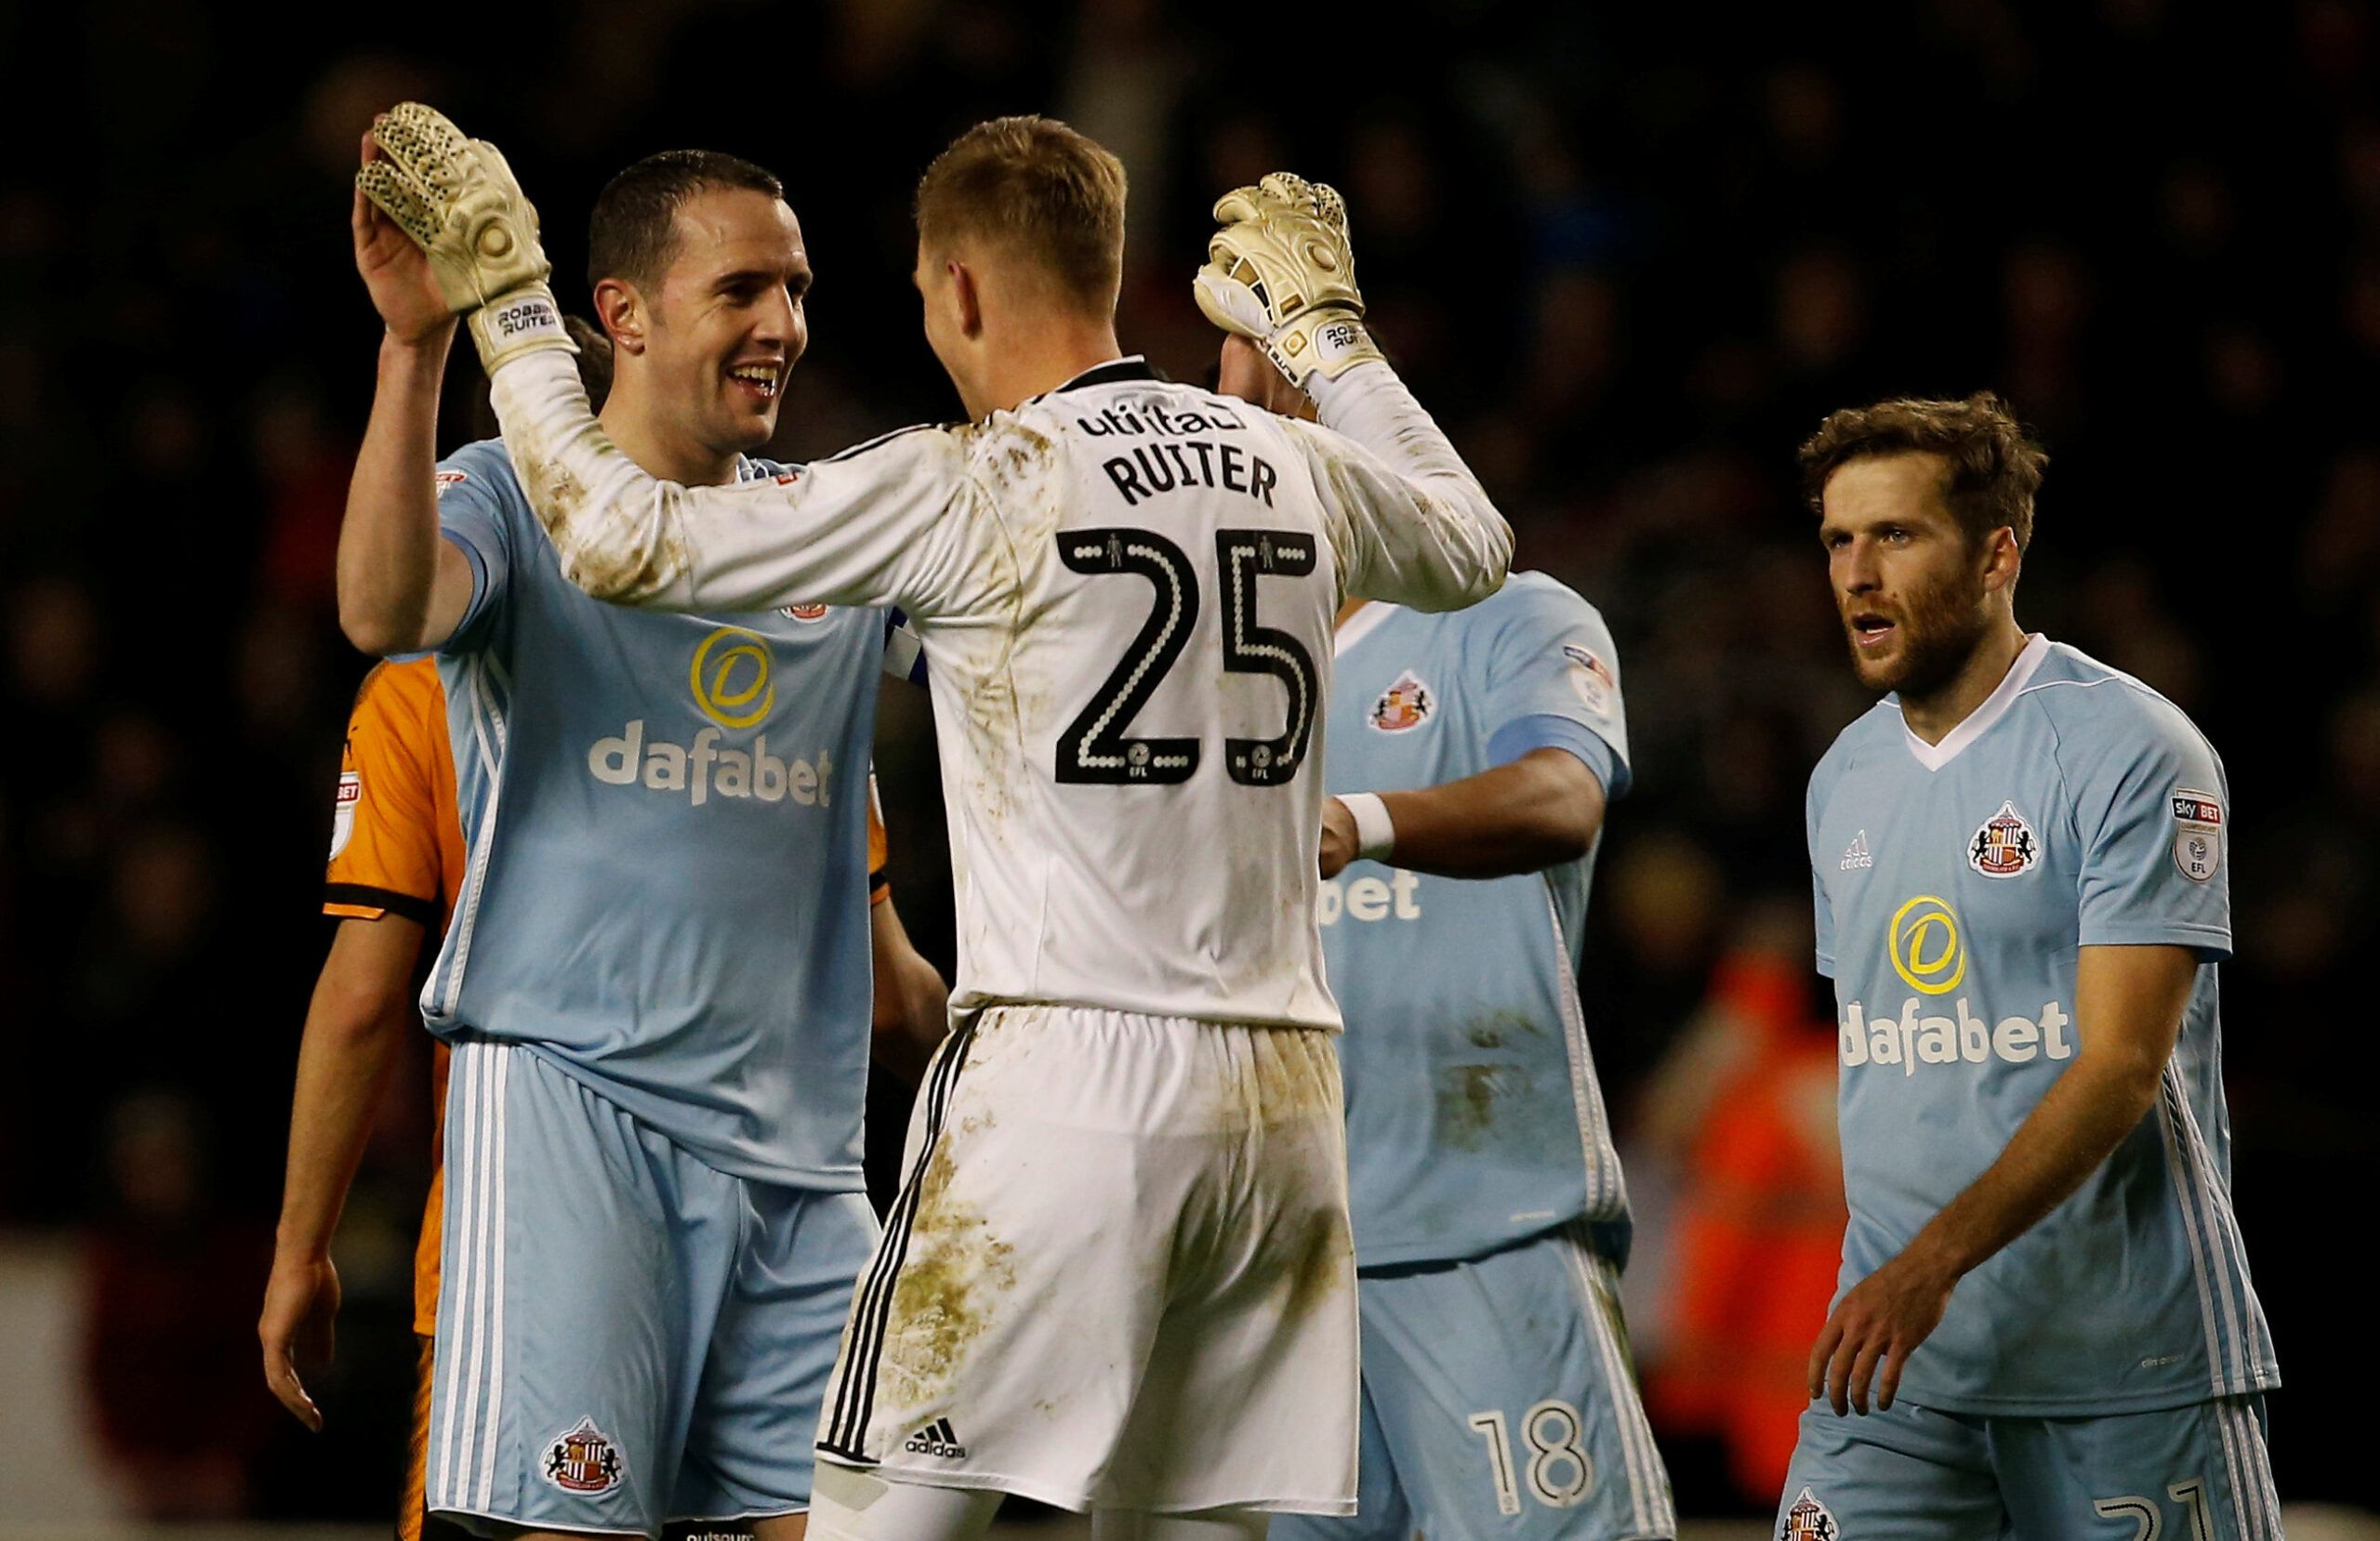 Soccer Football - Championship - Wolverhampton Wanderers vs Sunderland - Molineux Stadium, Wolverhampton, Britain - December 9, 2017   Sunderland's John O'Shea (L) and Robbin Ruiter congratulate each other after the match   Action Images/Craig Brough    EDITORIAL USE ONLY. No use with unauthorized audio, video, data, fixture lists, club/league logos or 